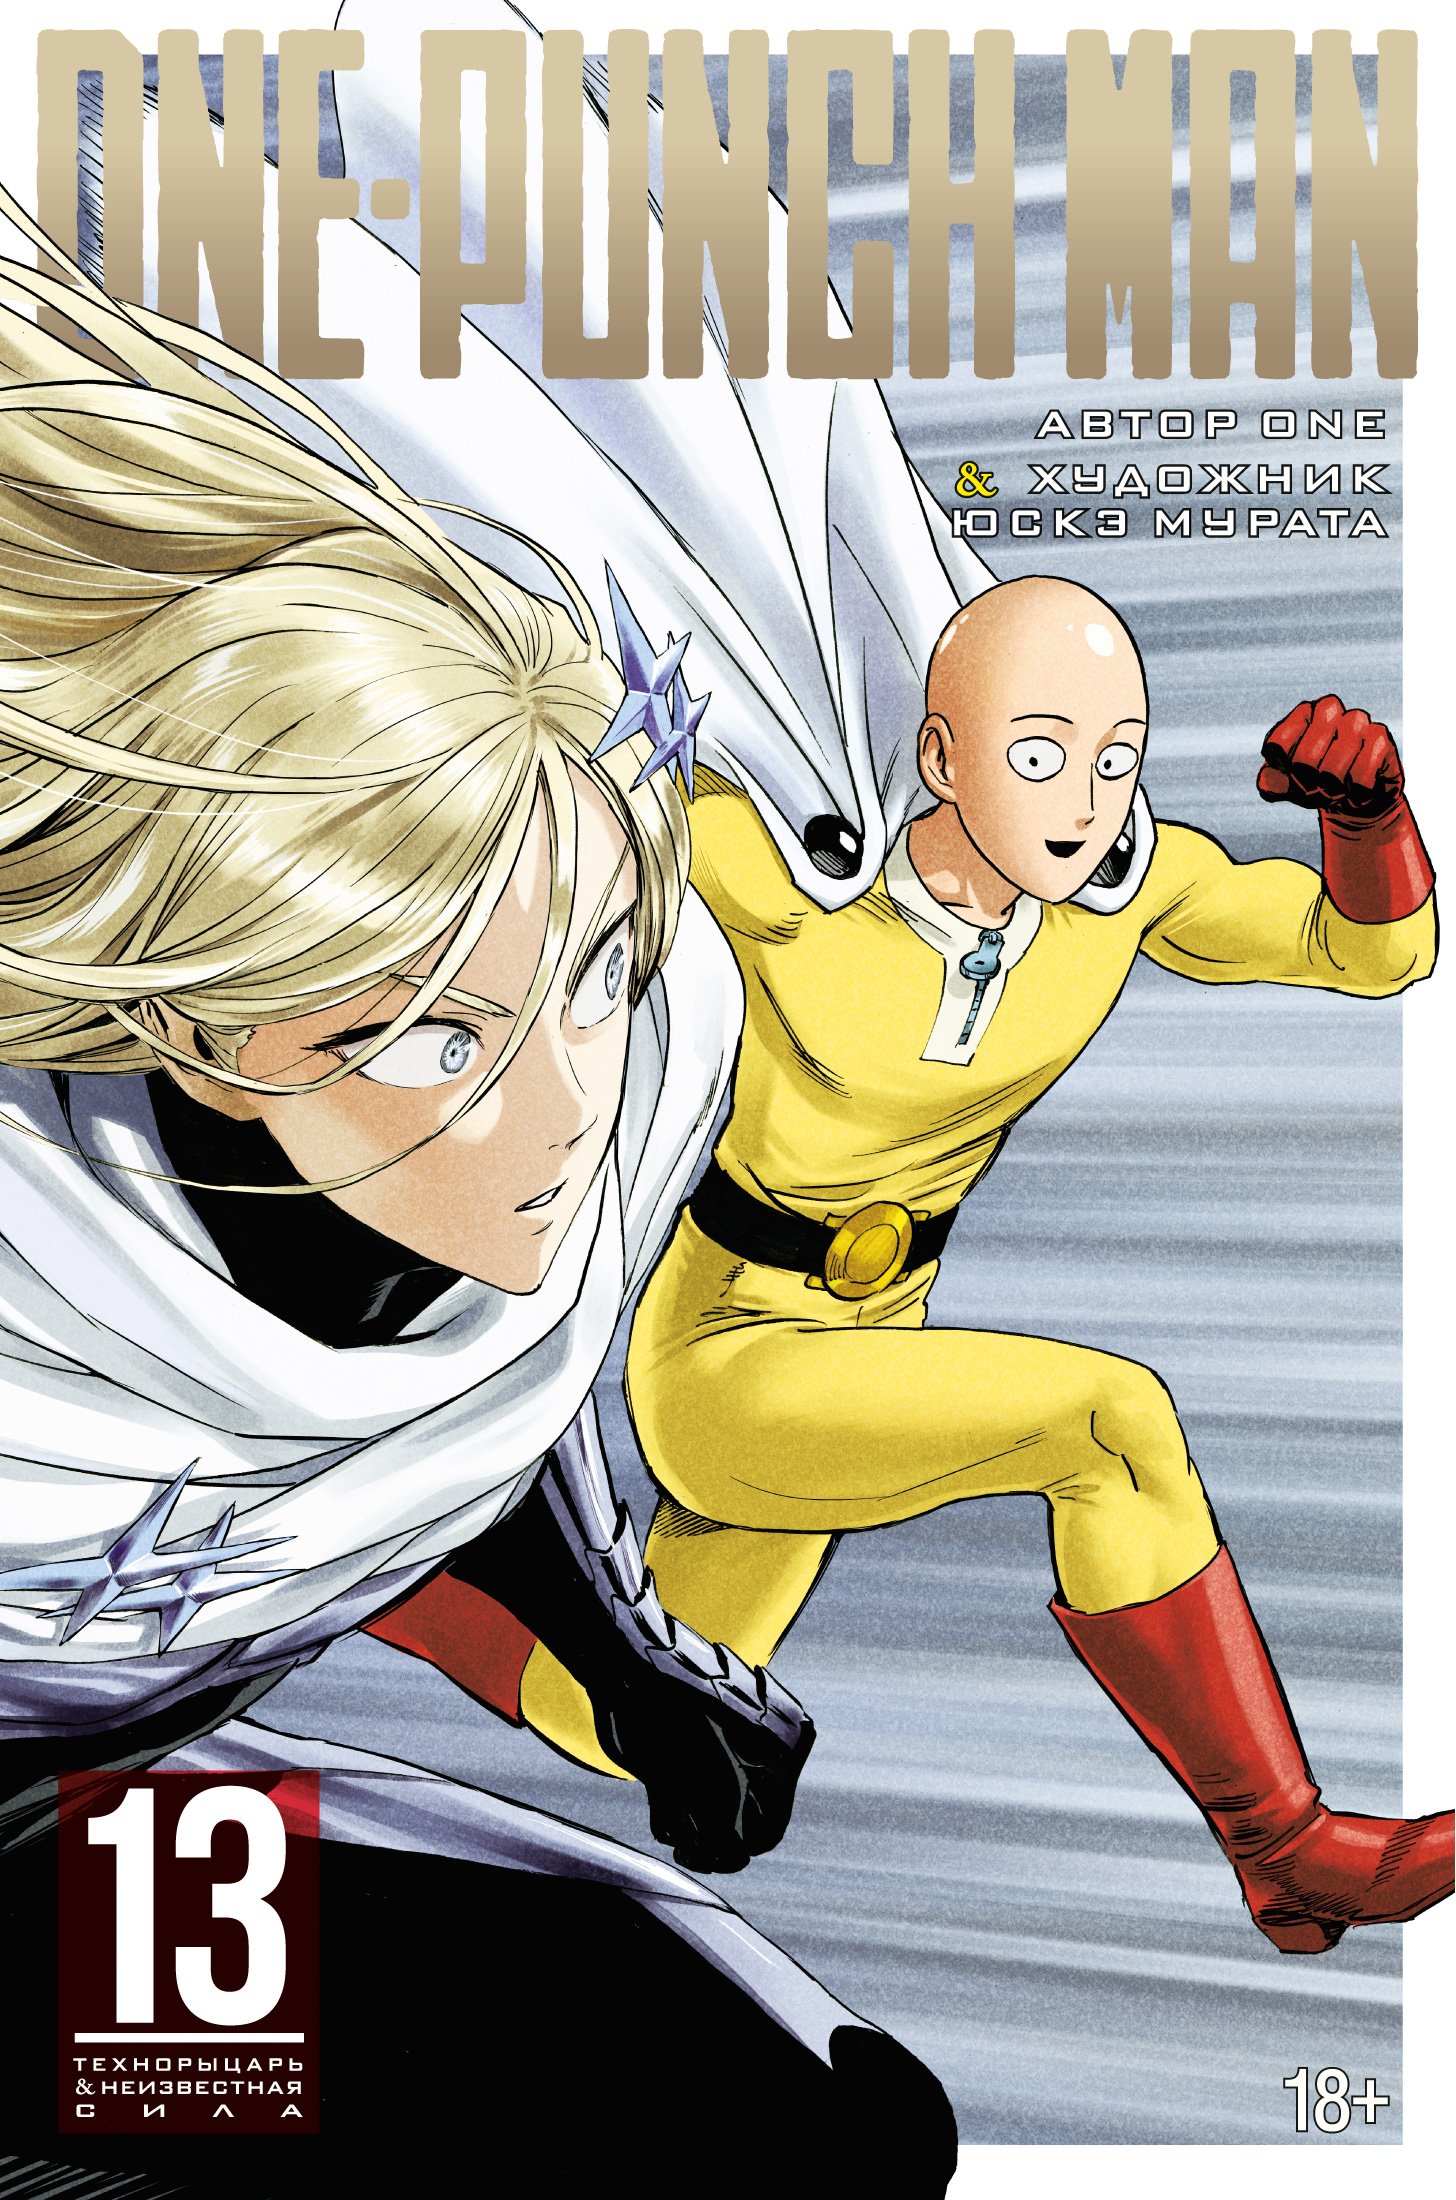 ONE - One-Punch Man 13